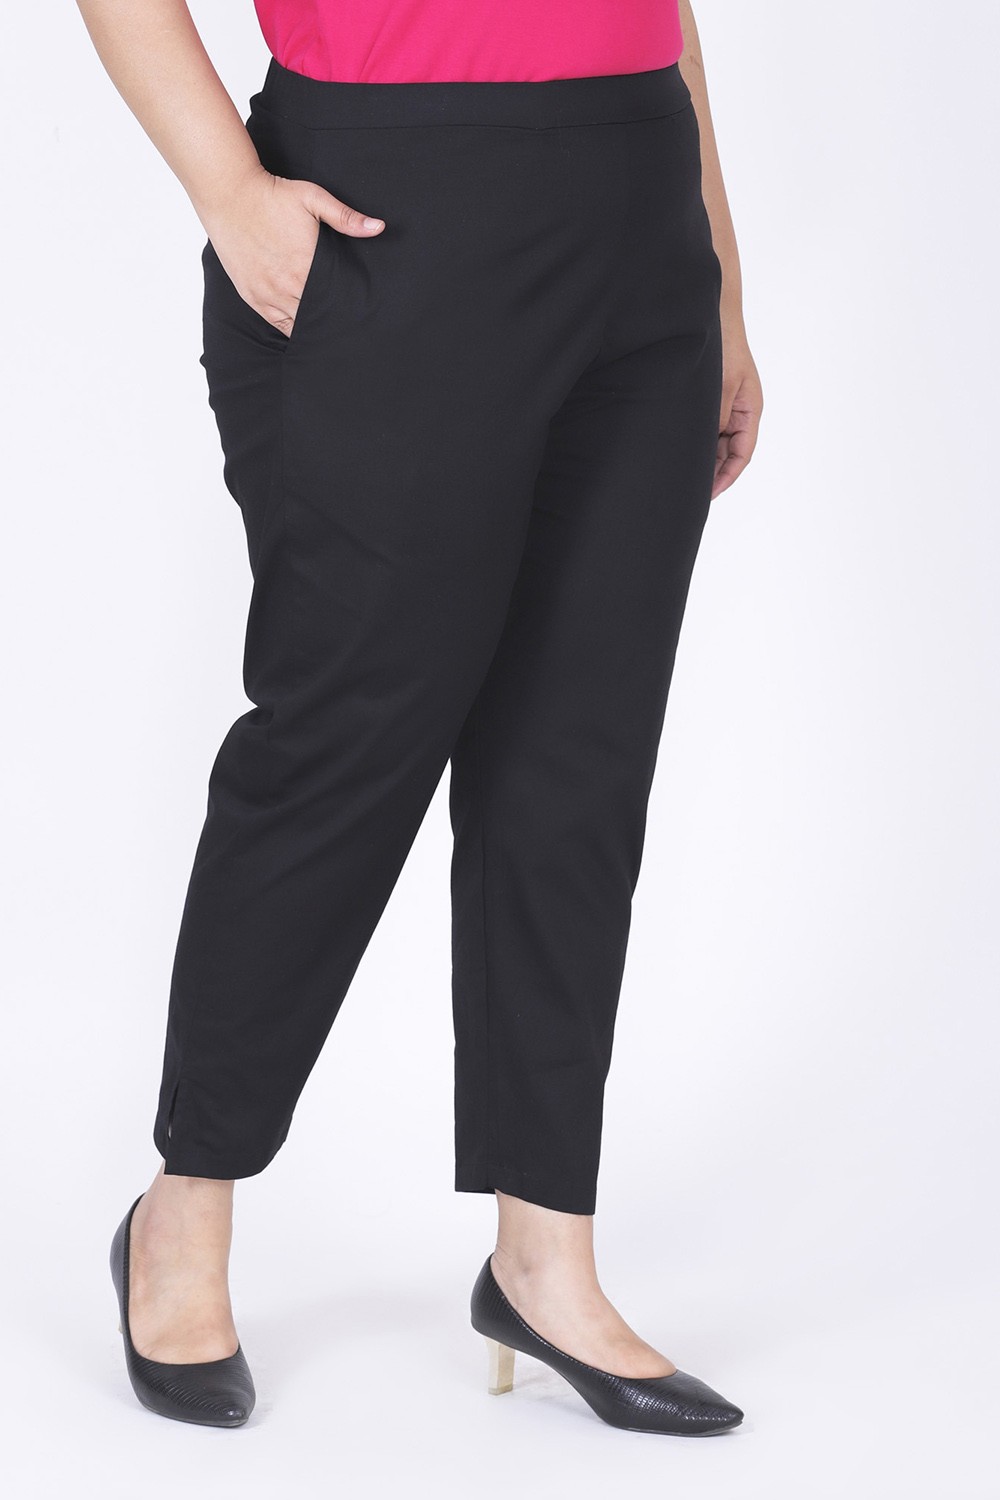 Buy Lastinch Women's Plus Size Viscose Black Pleated Trouser with